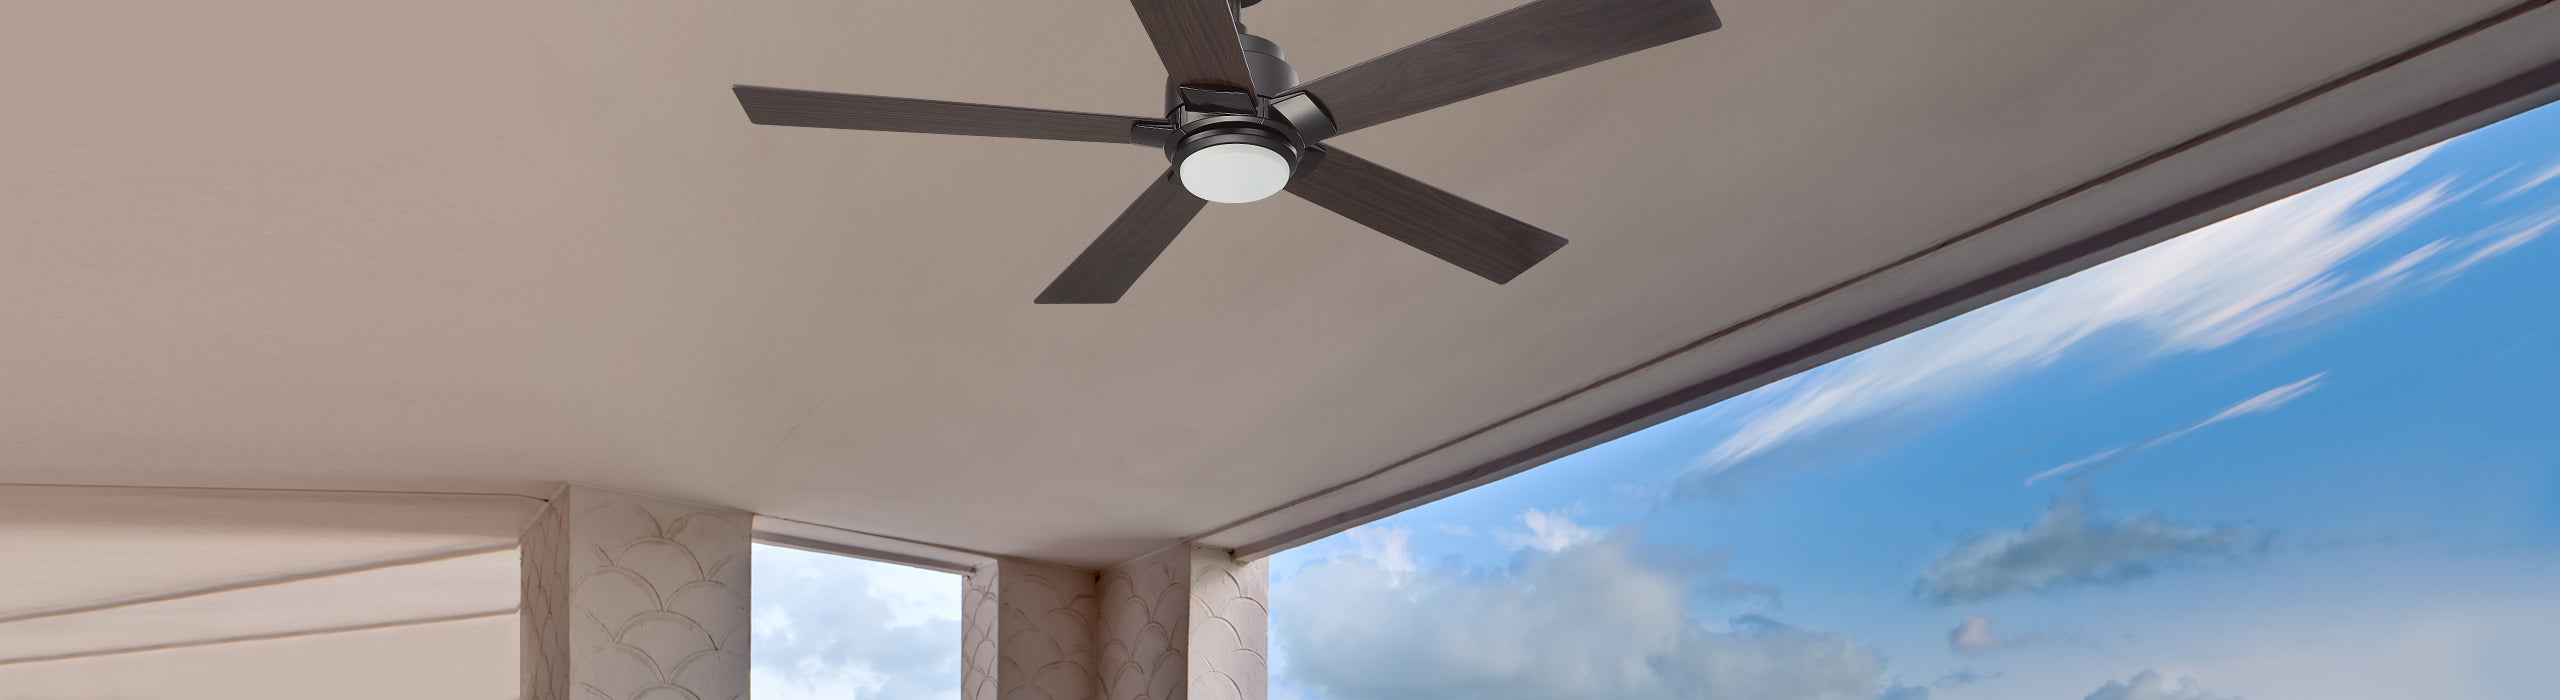 Outdoor Ceiling Fan Damp Rated